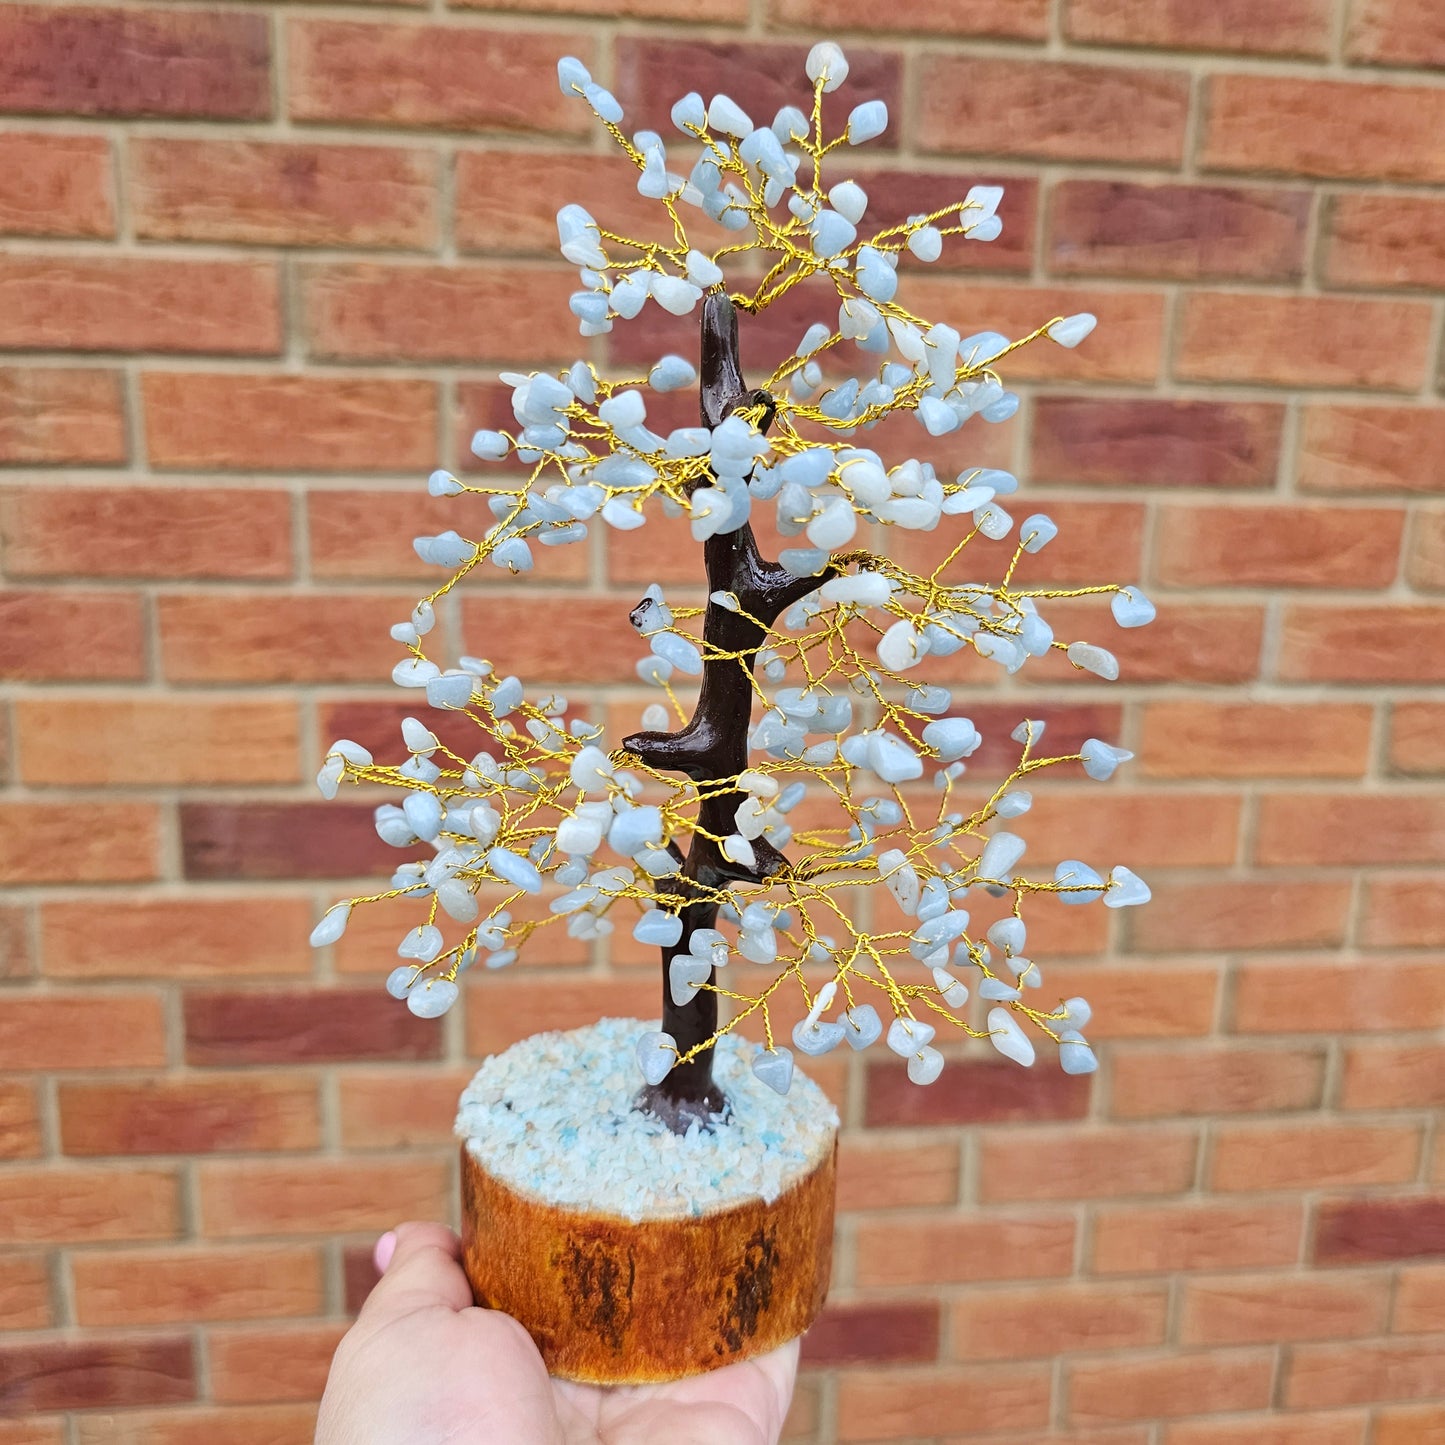 Angelite Tree 26cm  | Natural Stone 300 chip beads | Birthday Gifts, Anniversary Gifts, Valentine's Day, Christmas, Easter, Eid, Mother's Day, Diwali, Hannukah, Women's, Girl's, Gifts for her, Gifts for Girlfriend, Gifts for Mom, Gifts for Mum, Gifts for Friend, Handmade Gifts, Handmade Jewelry, New Year's Eve, Graduation, Boho, Hippie, Minimalist, Gemstone, Crystal, Crystal Healing